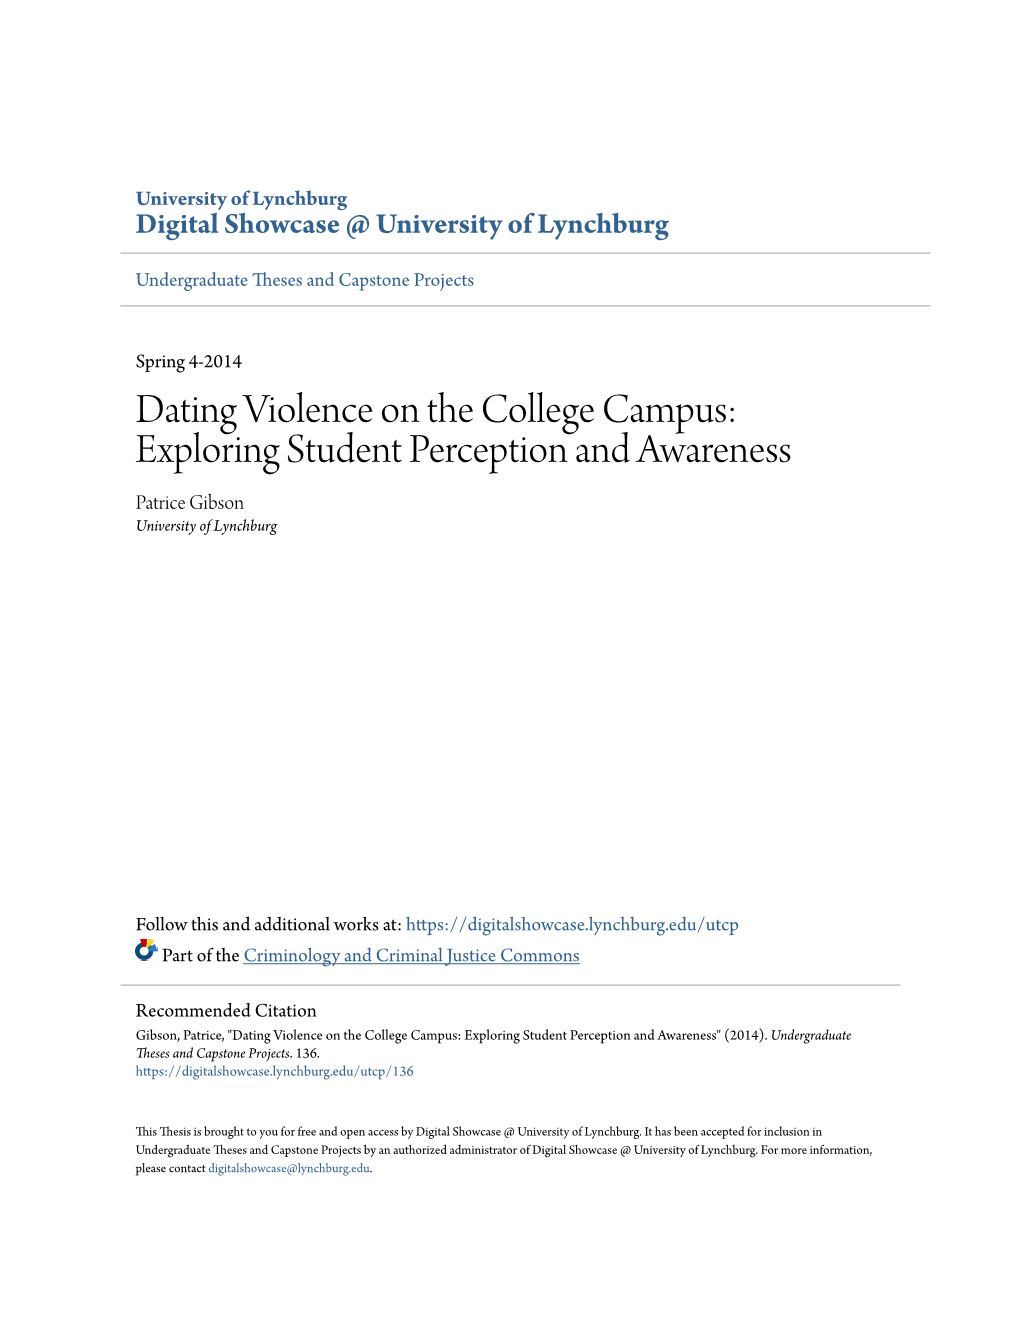 Dating Violence on the College Campus: Exploring Student Perception and Awareness Patrice Gibson University of Lynchburg